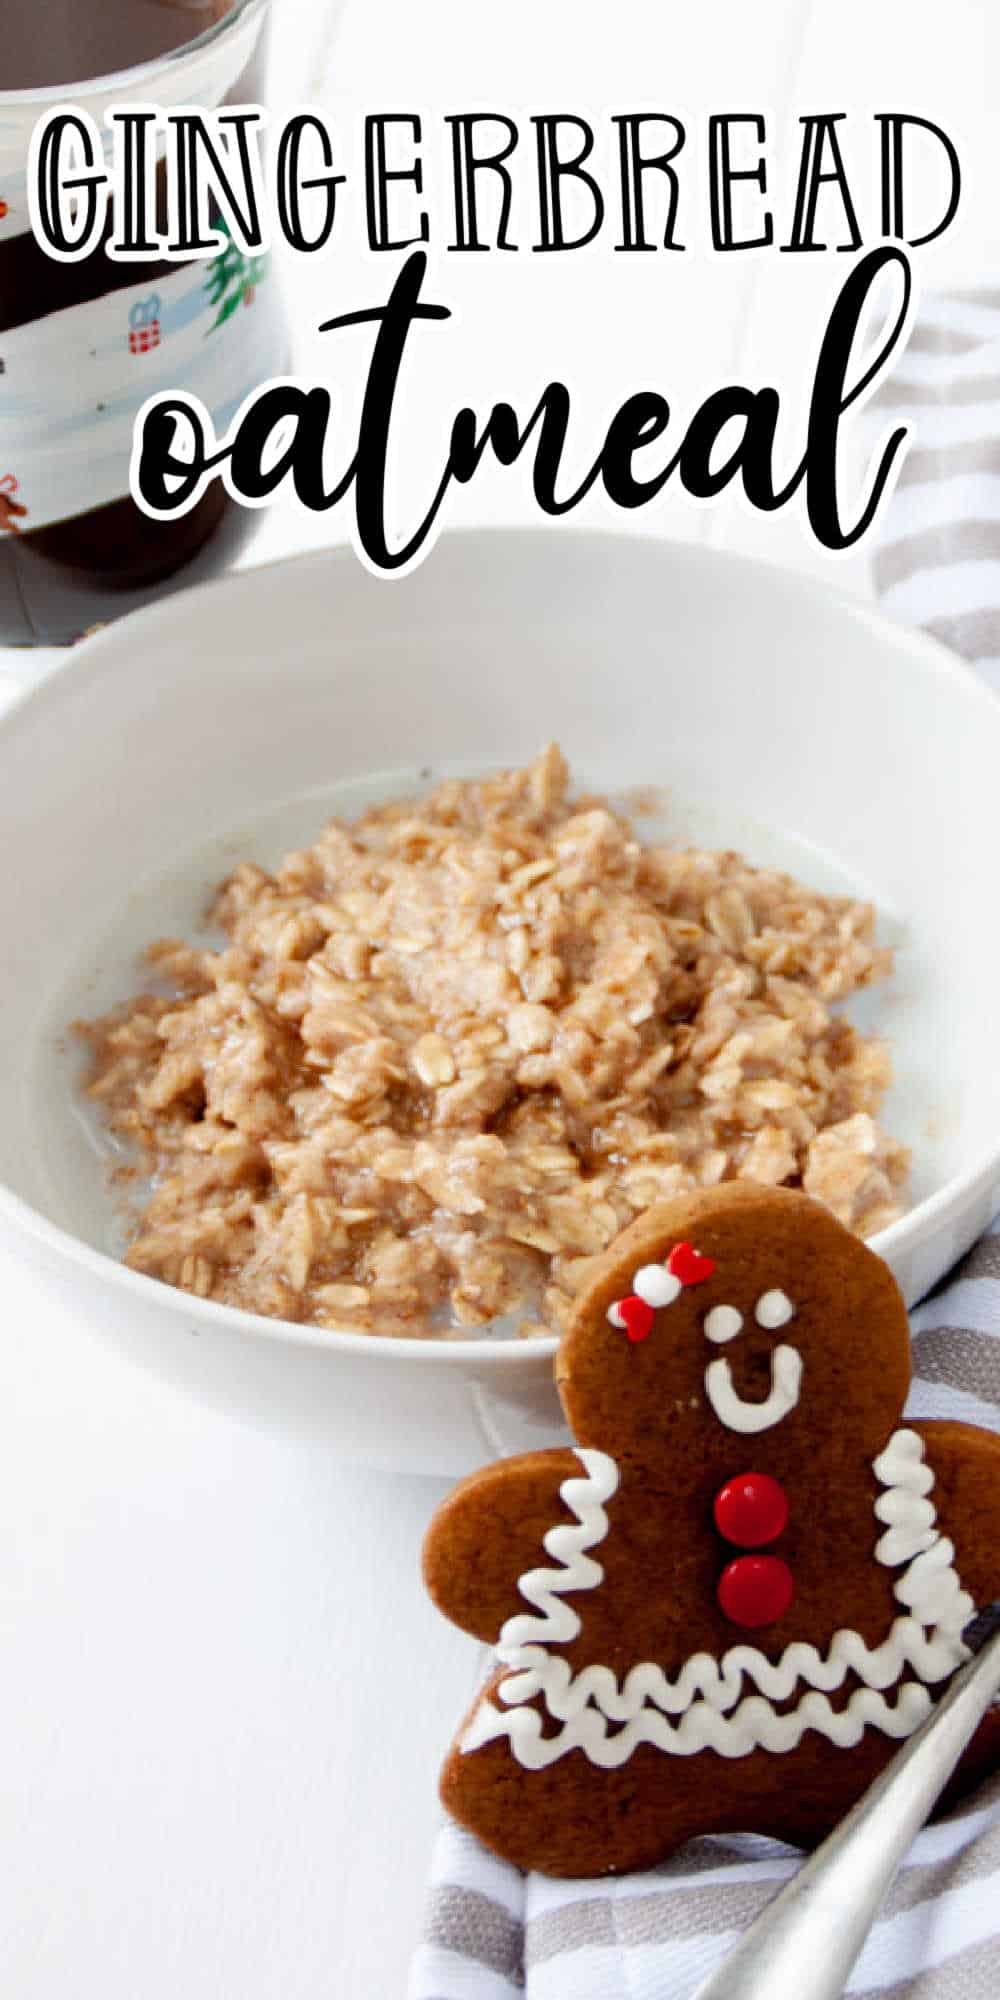 Gingerbread Oatmeal Recipe (Done in 10 minutes!)